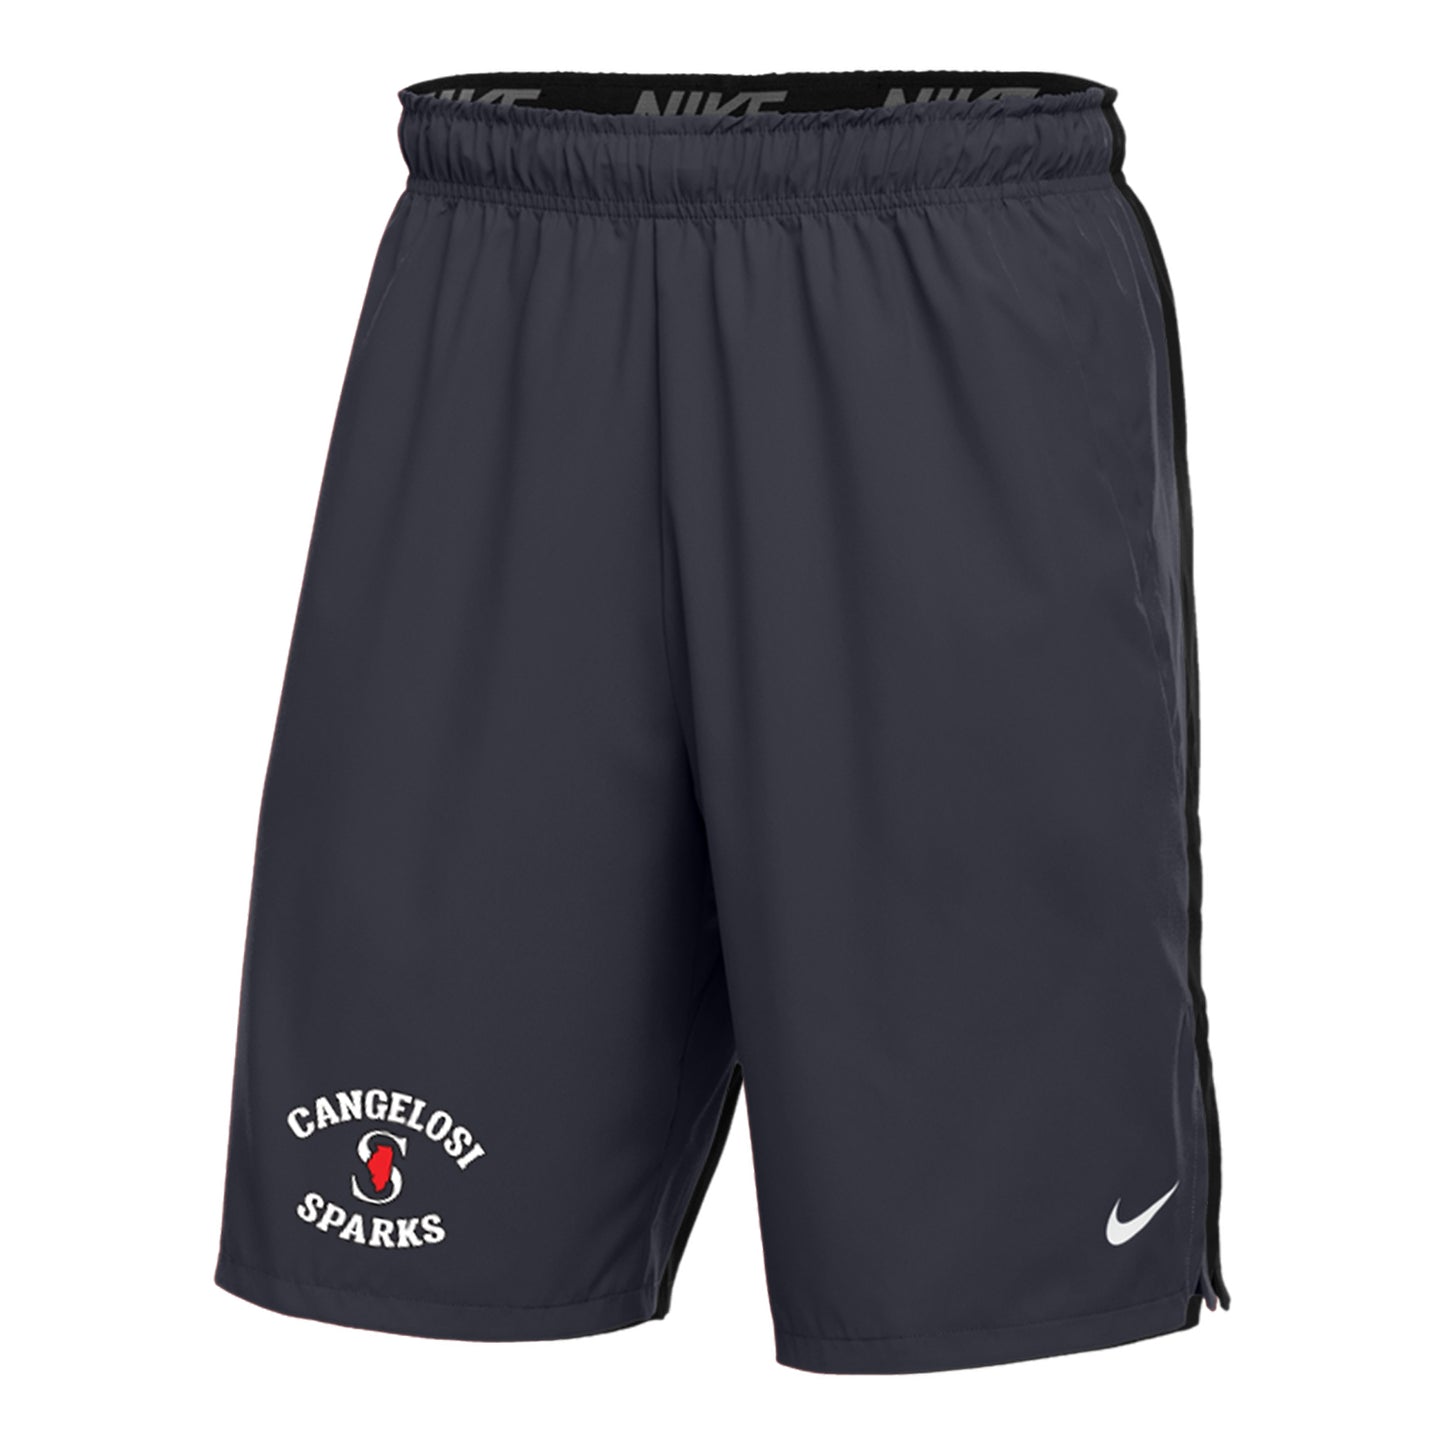 MENS NIKE SPARKS FLY SHORTS ANTHRACITE